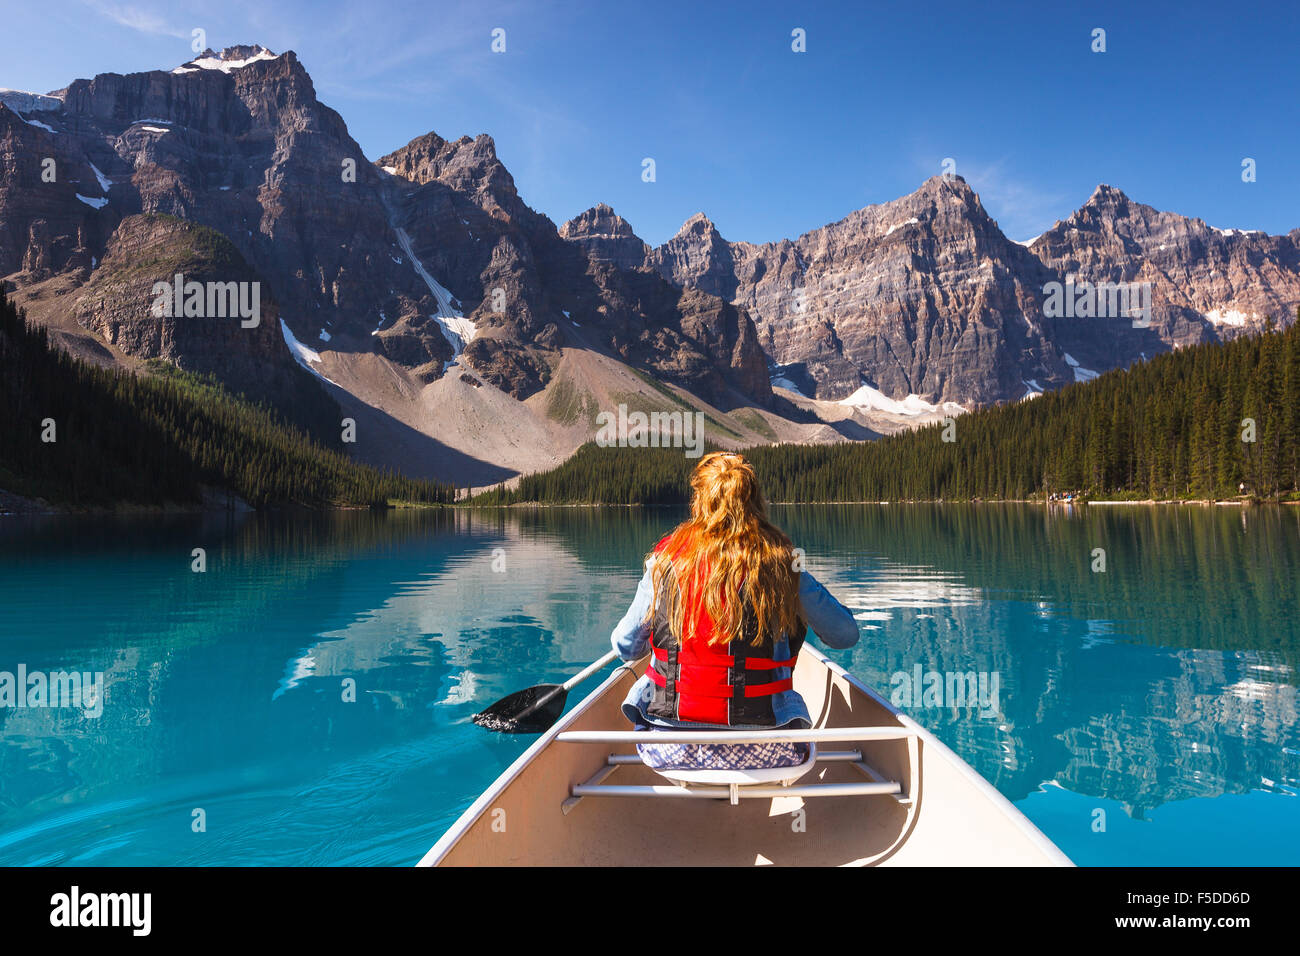 A young woman canoing at Moraine Lake, Banff National Park, Alberta, Canada, America (Canadian Rocky Mountains). Stock Photo